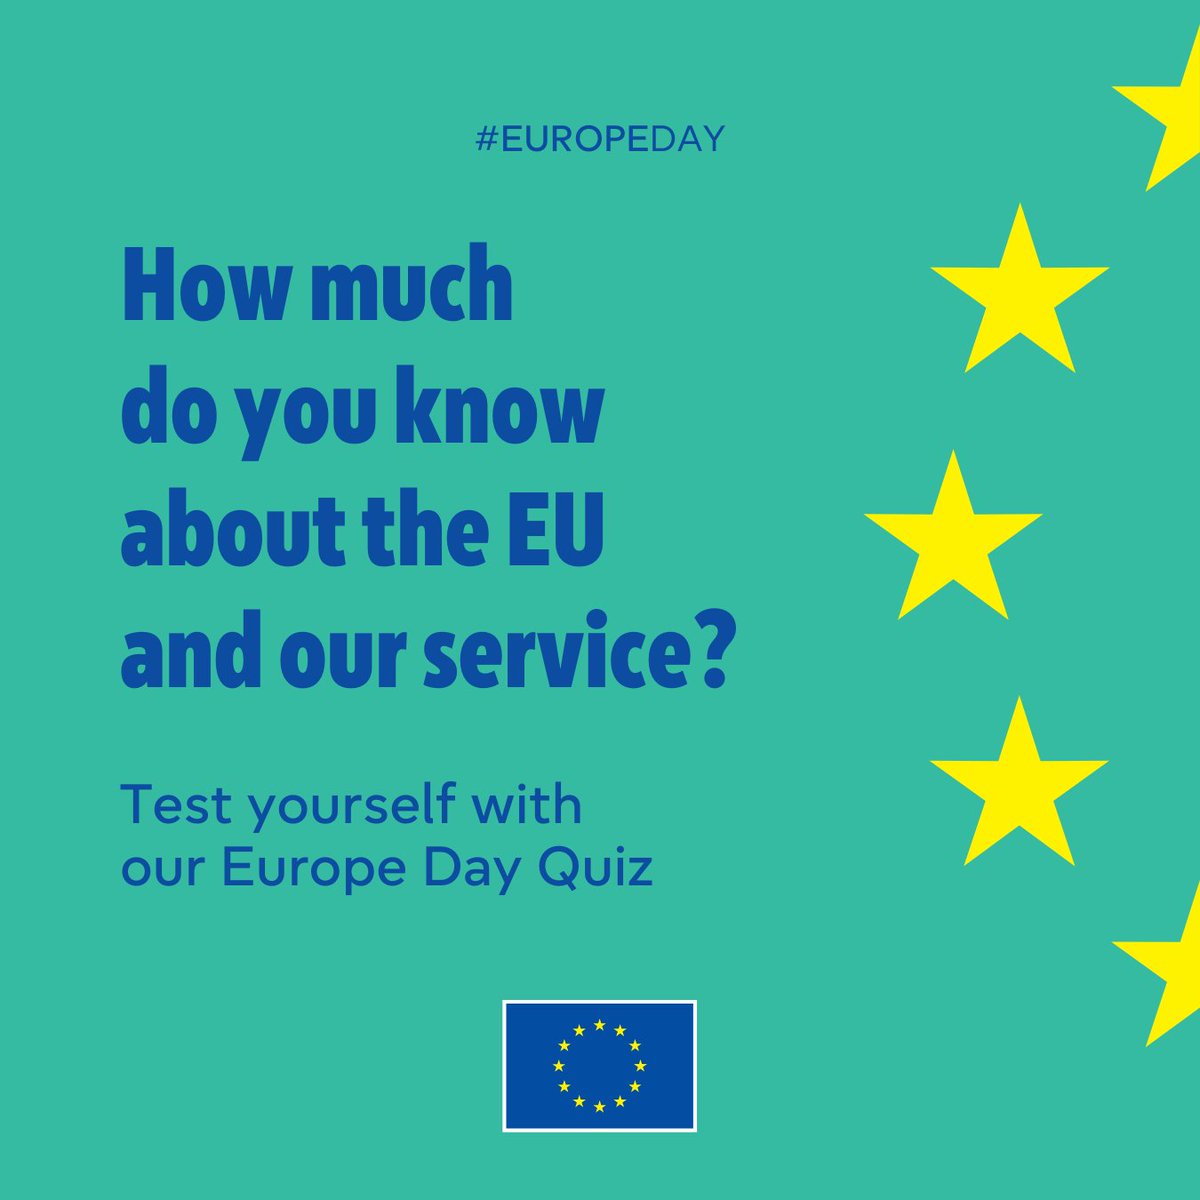 How well do you know the 🇪🇺 EU? From the EU in the world and its history to what the EU has in store for the future, test your knowledge with our quiz: togetherweareeurope.eu. #EuropeDay